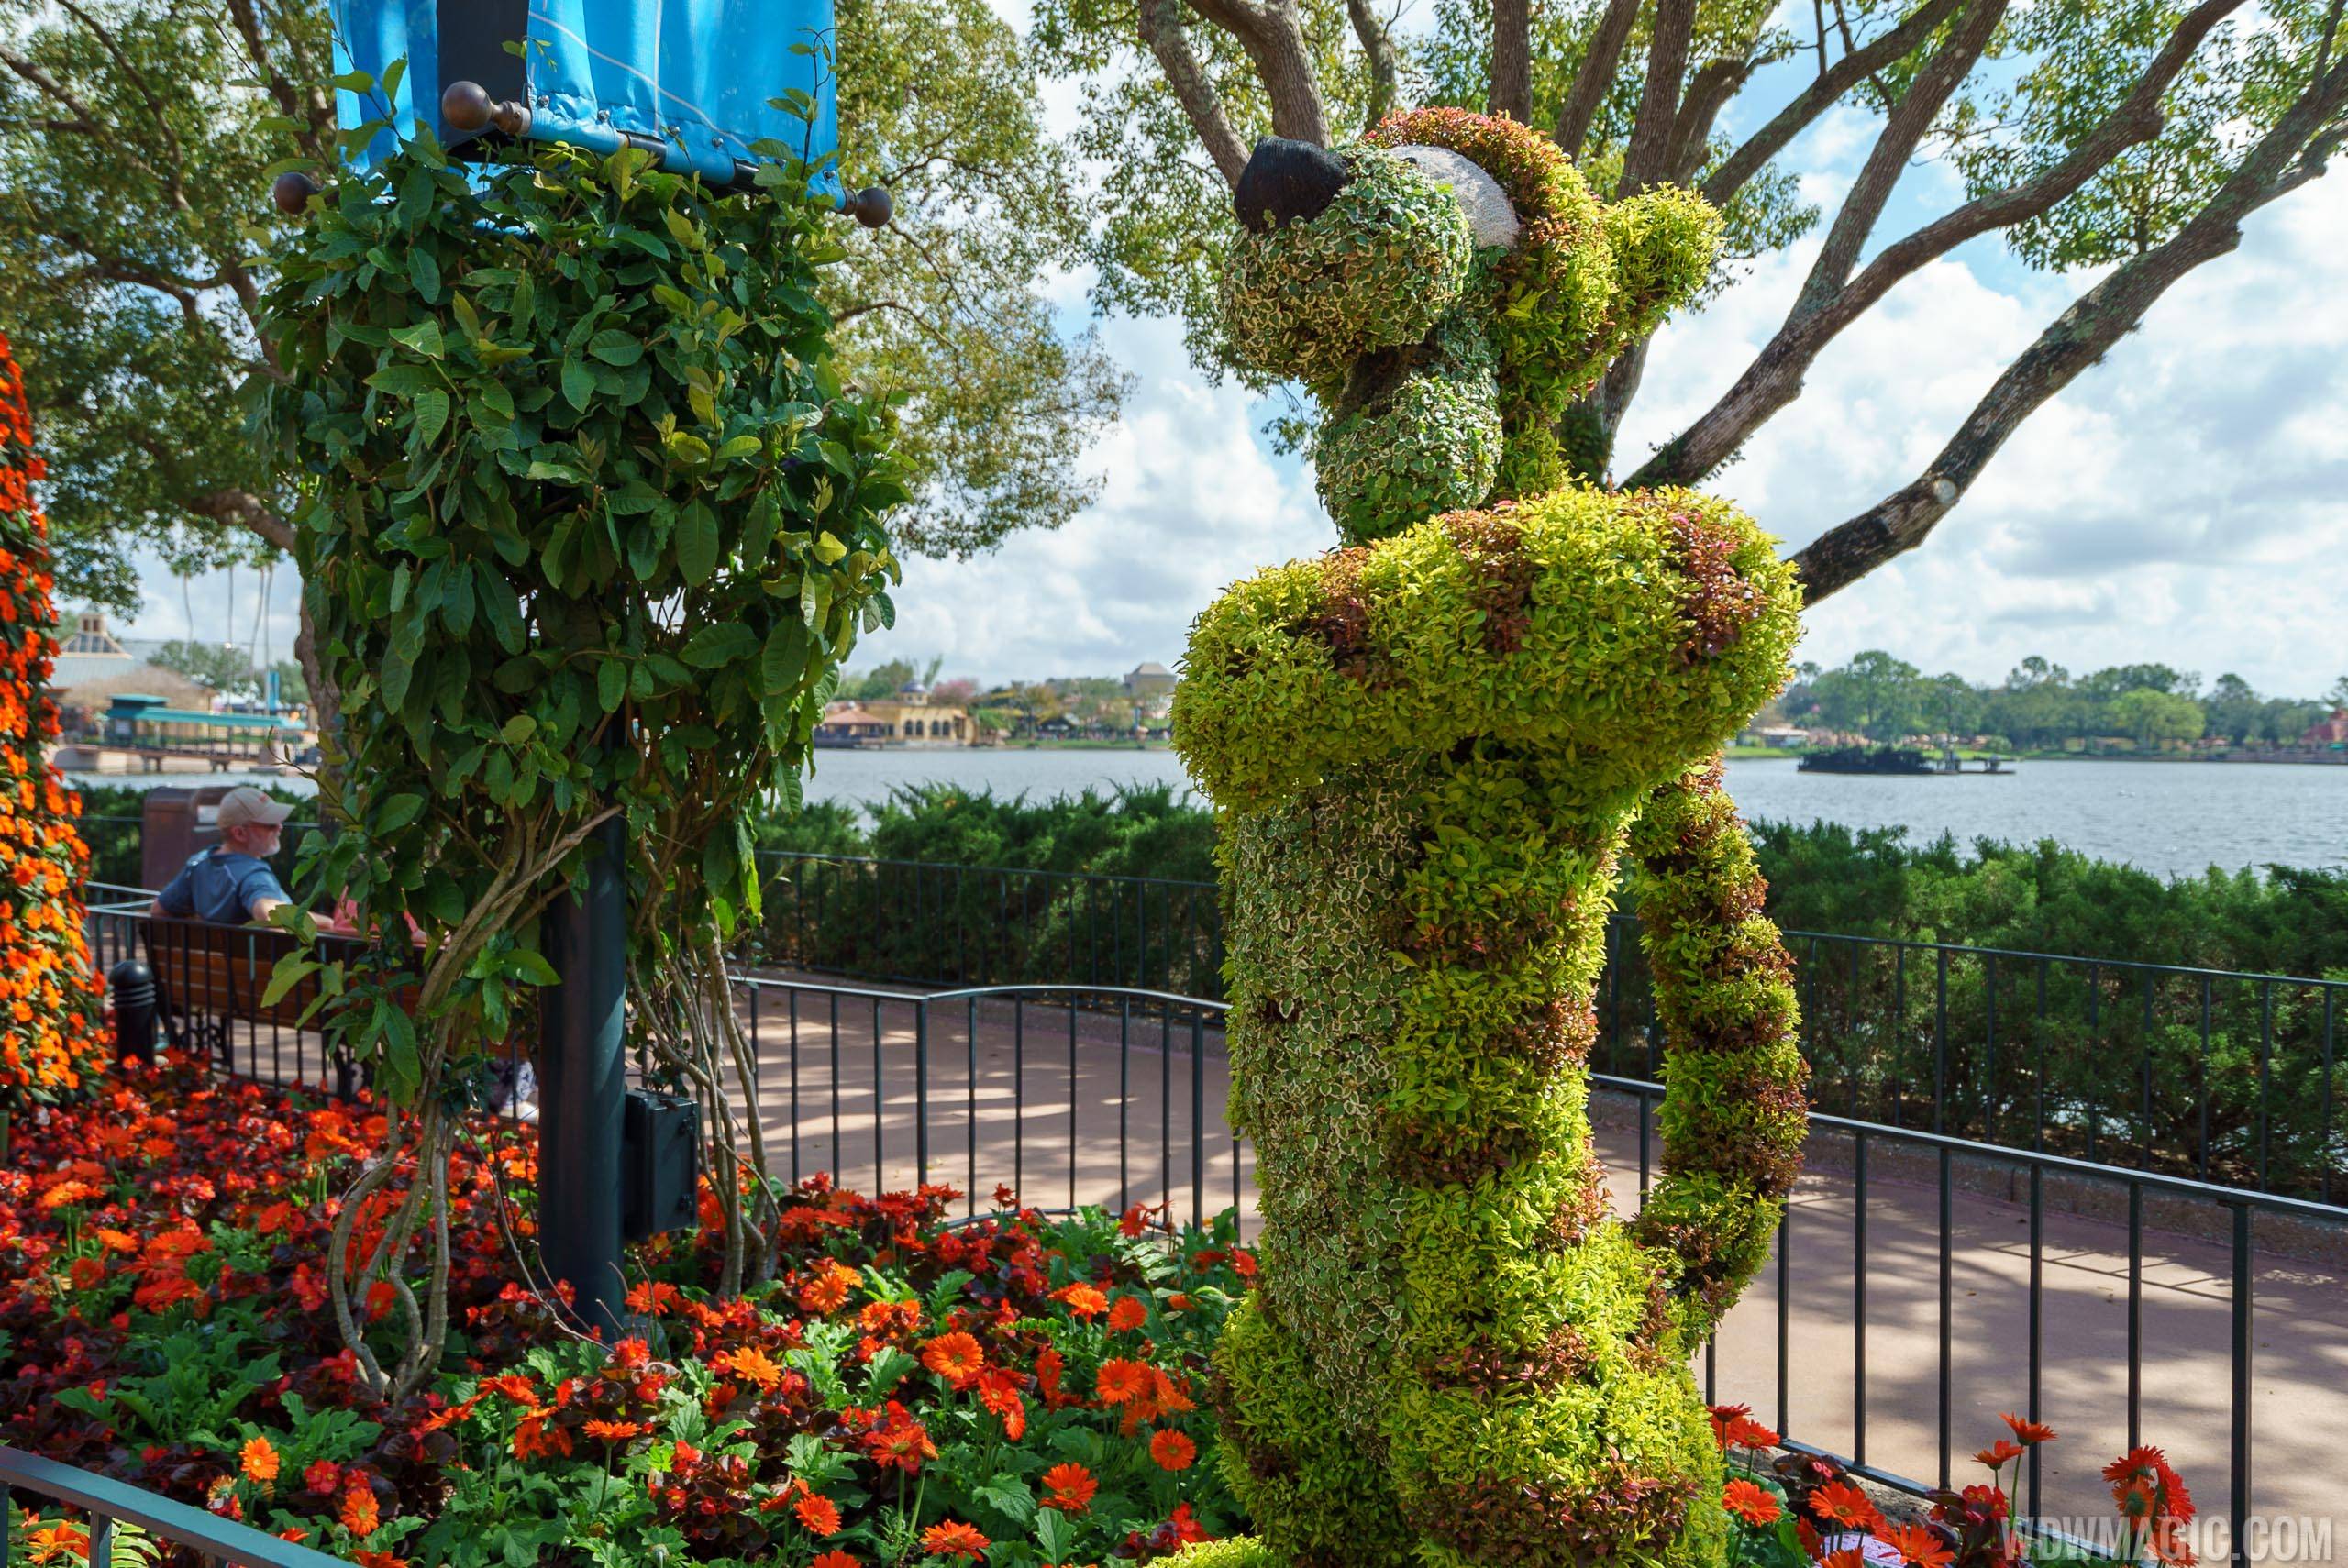 2017 Flower and Garden Festival - Tigger topiary at the UK Pavilion